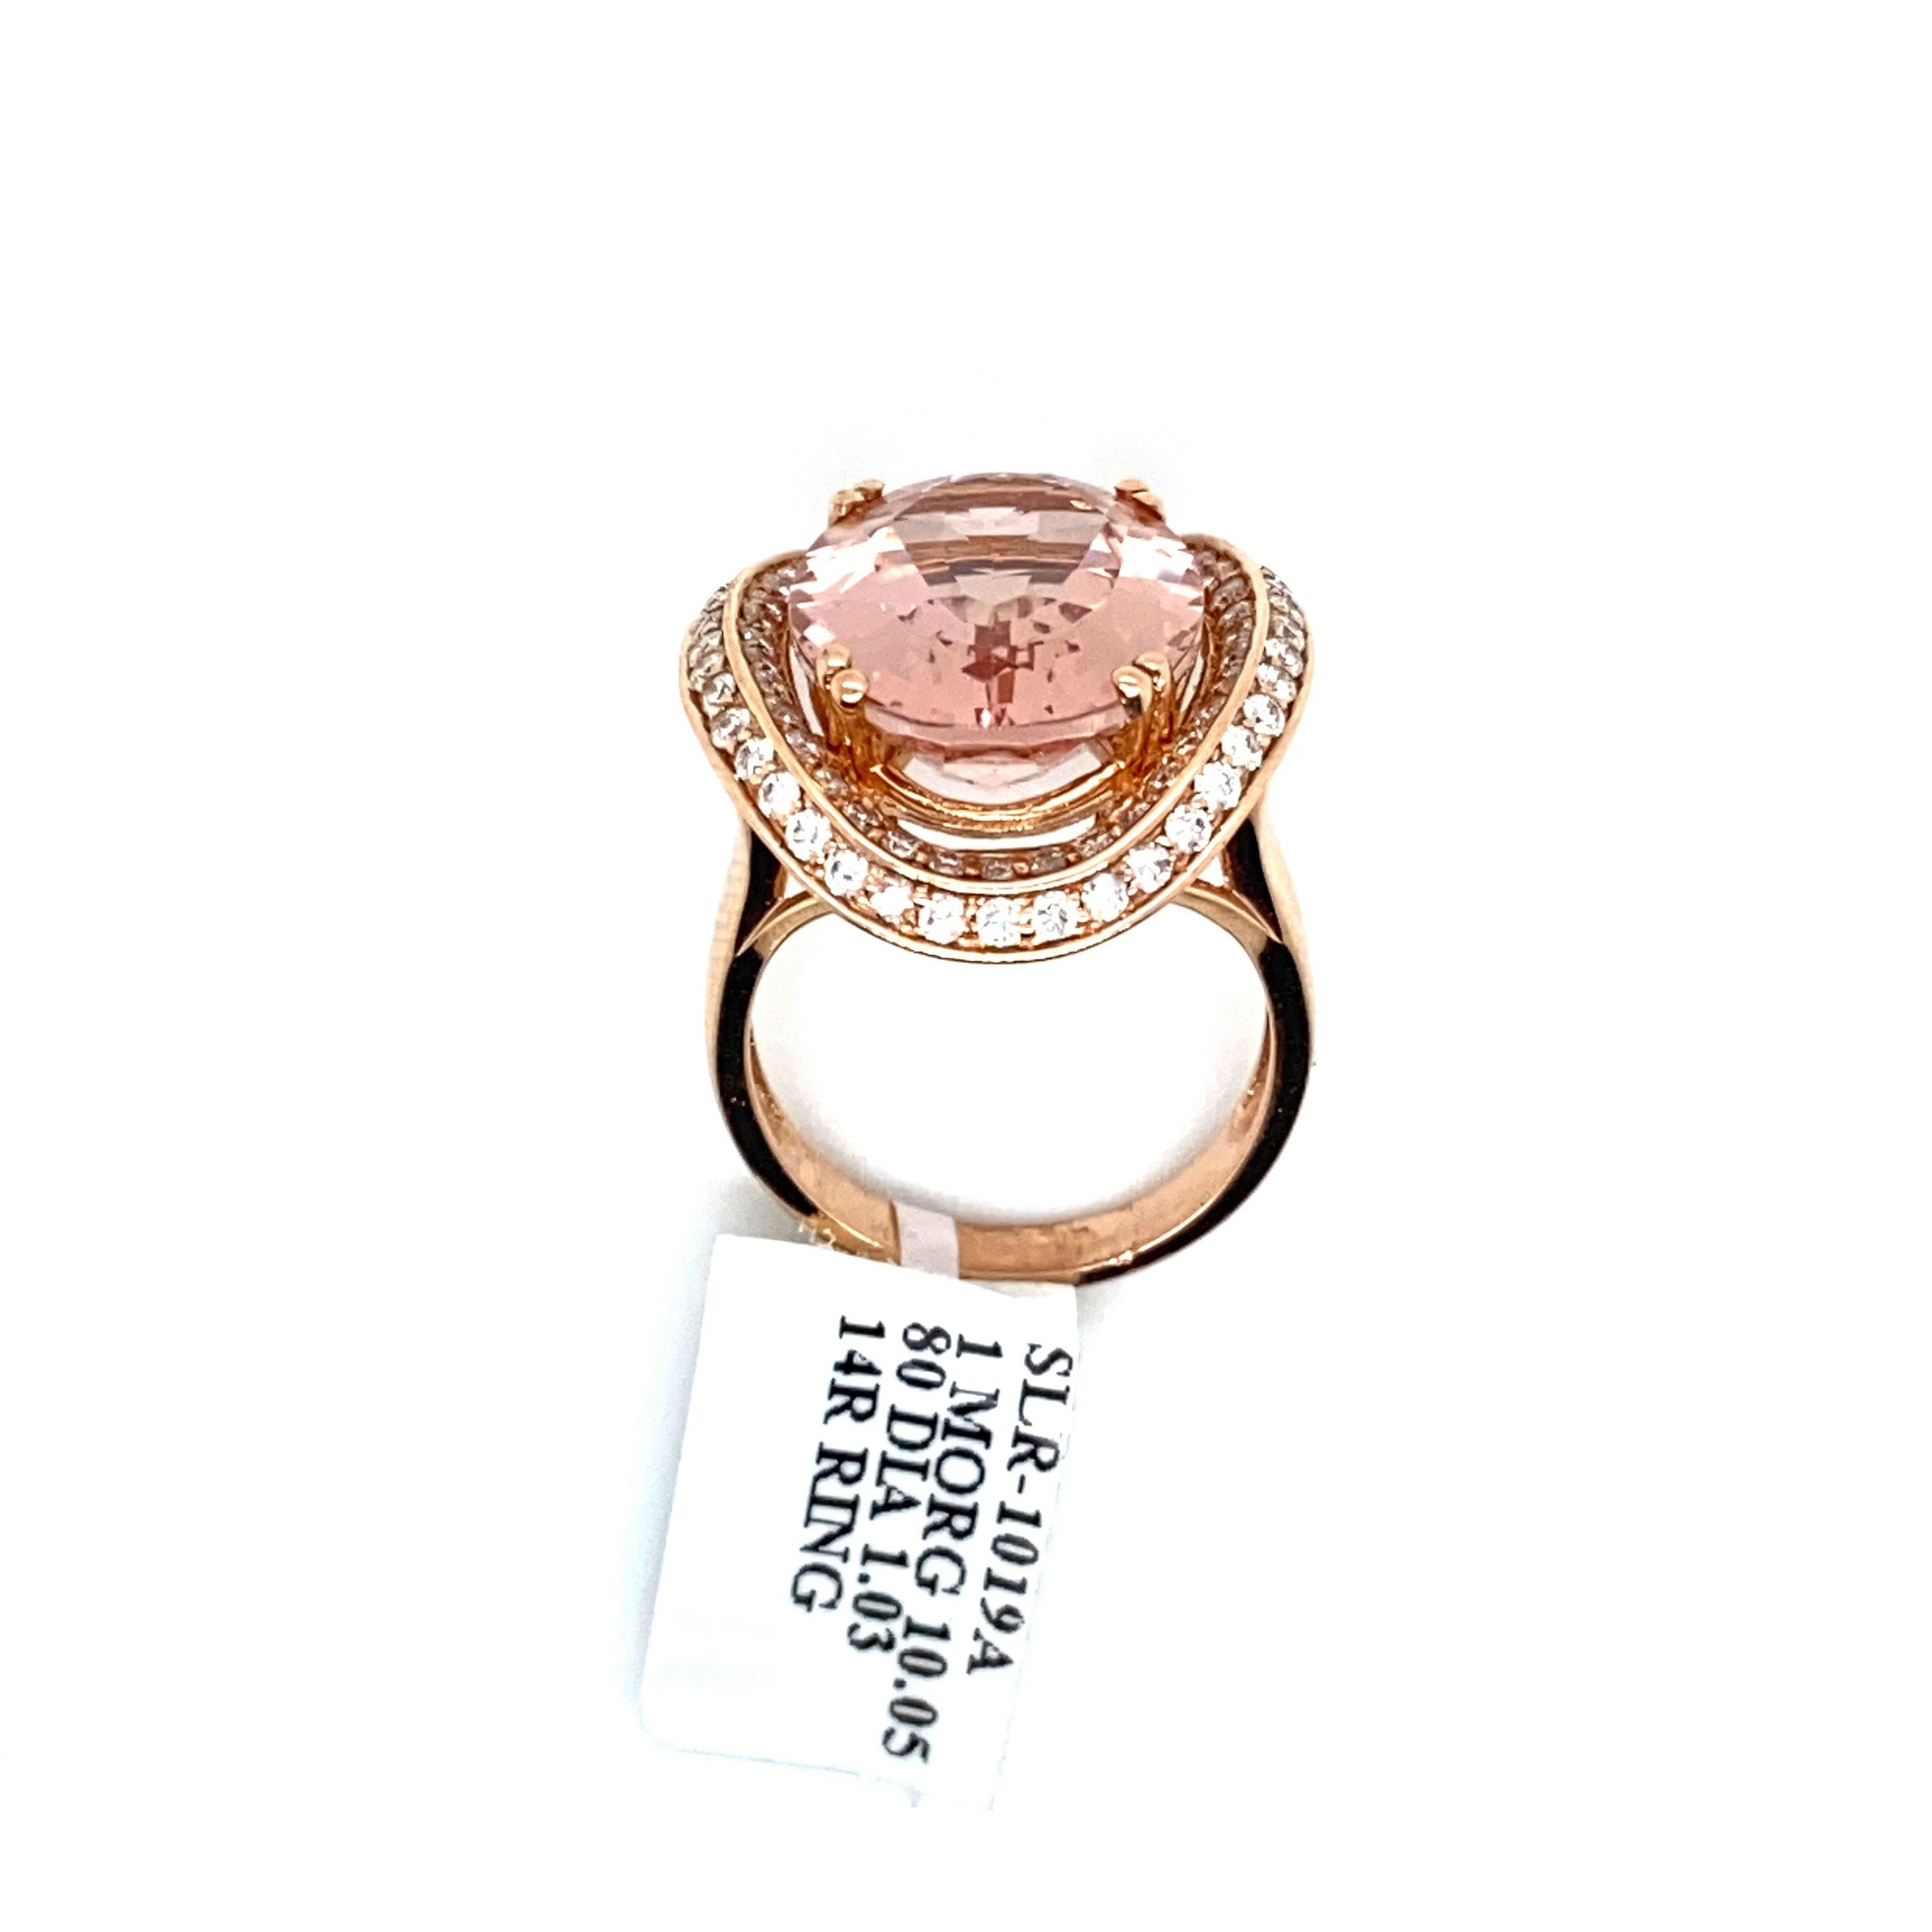 This is a large and magnificent natural morganite and diamond cocktail ring set in solid 14K rose gold. The natural 10.05 Ct morganite oval (Over 10 carats of a AAA quality gem!) has an excellent peachy pink color and is set on top of a curved